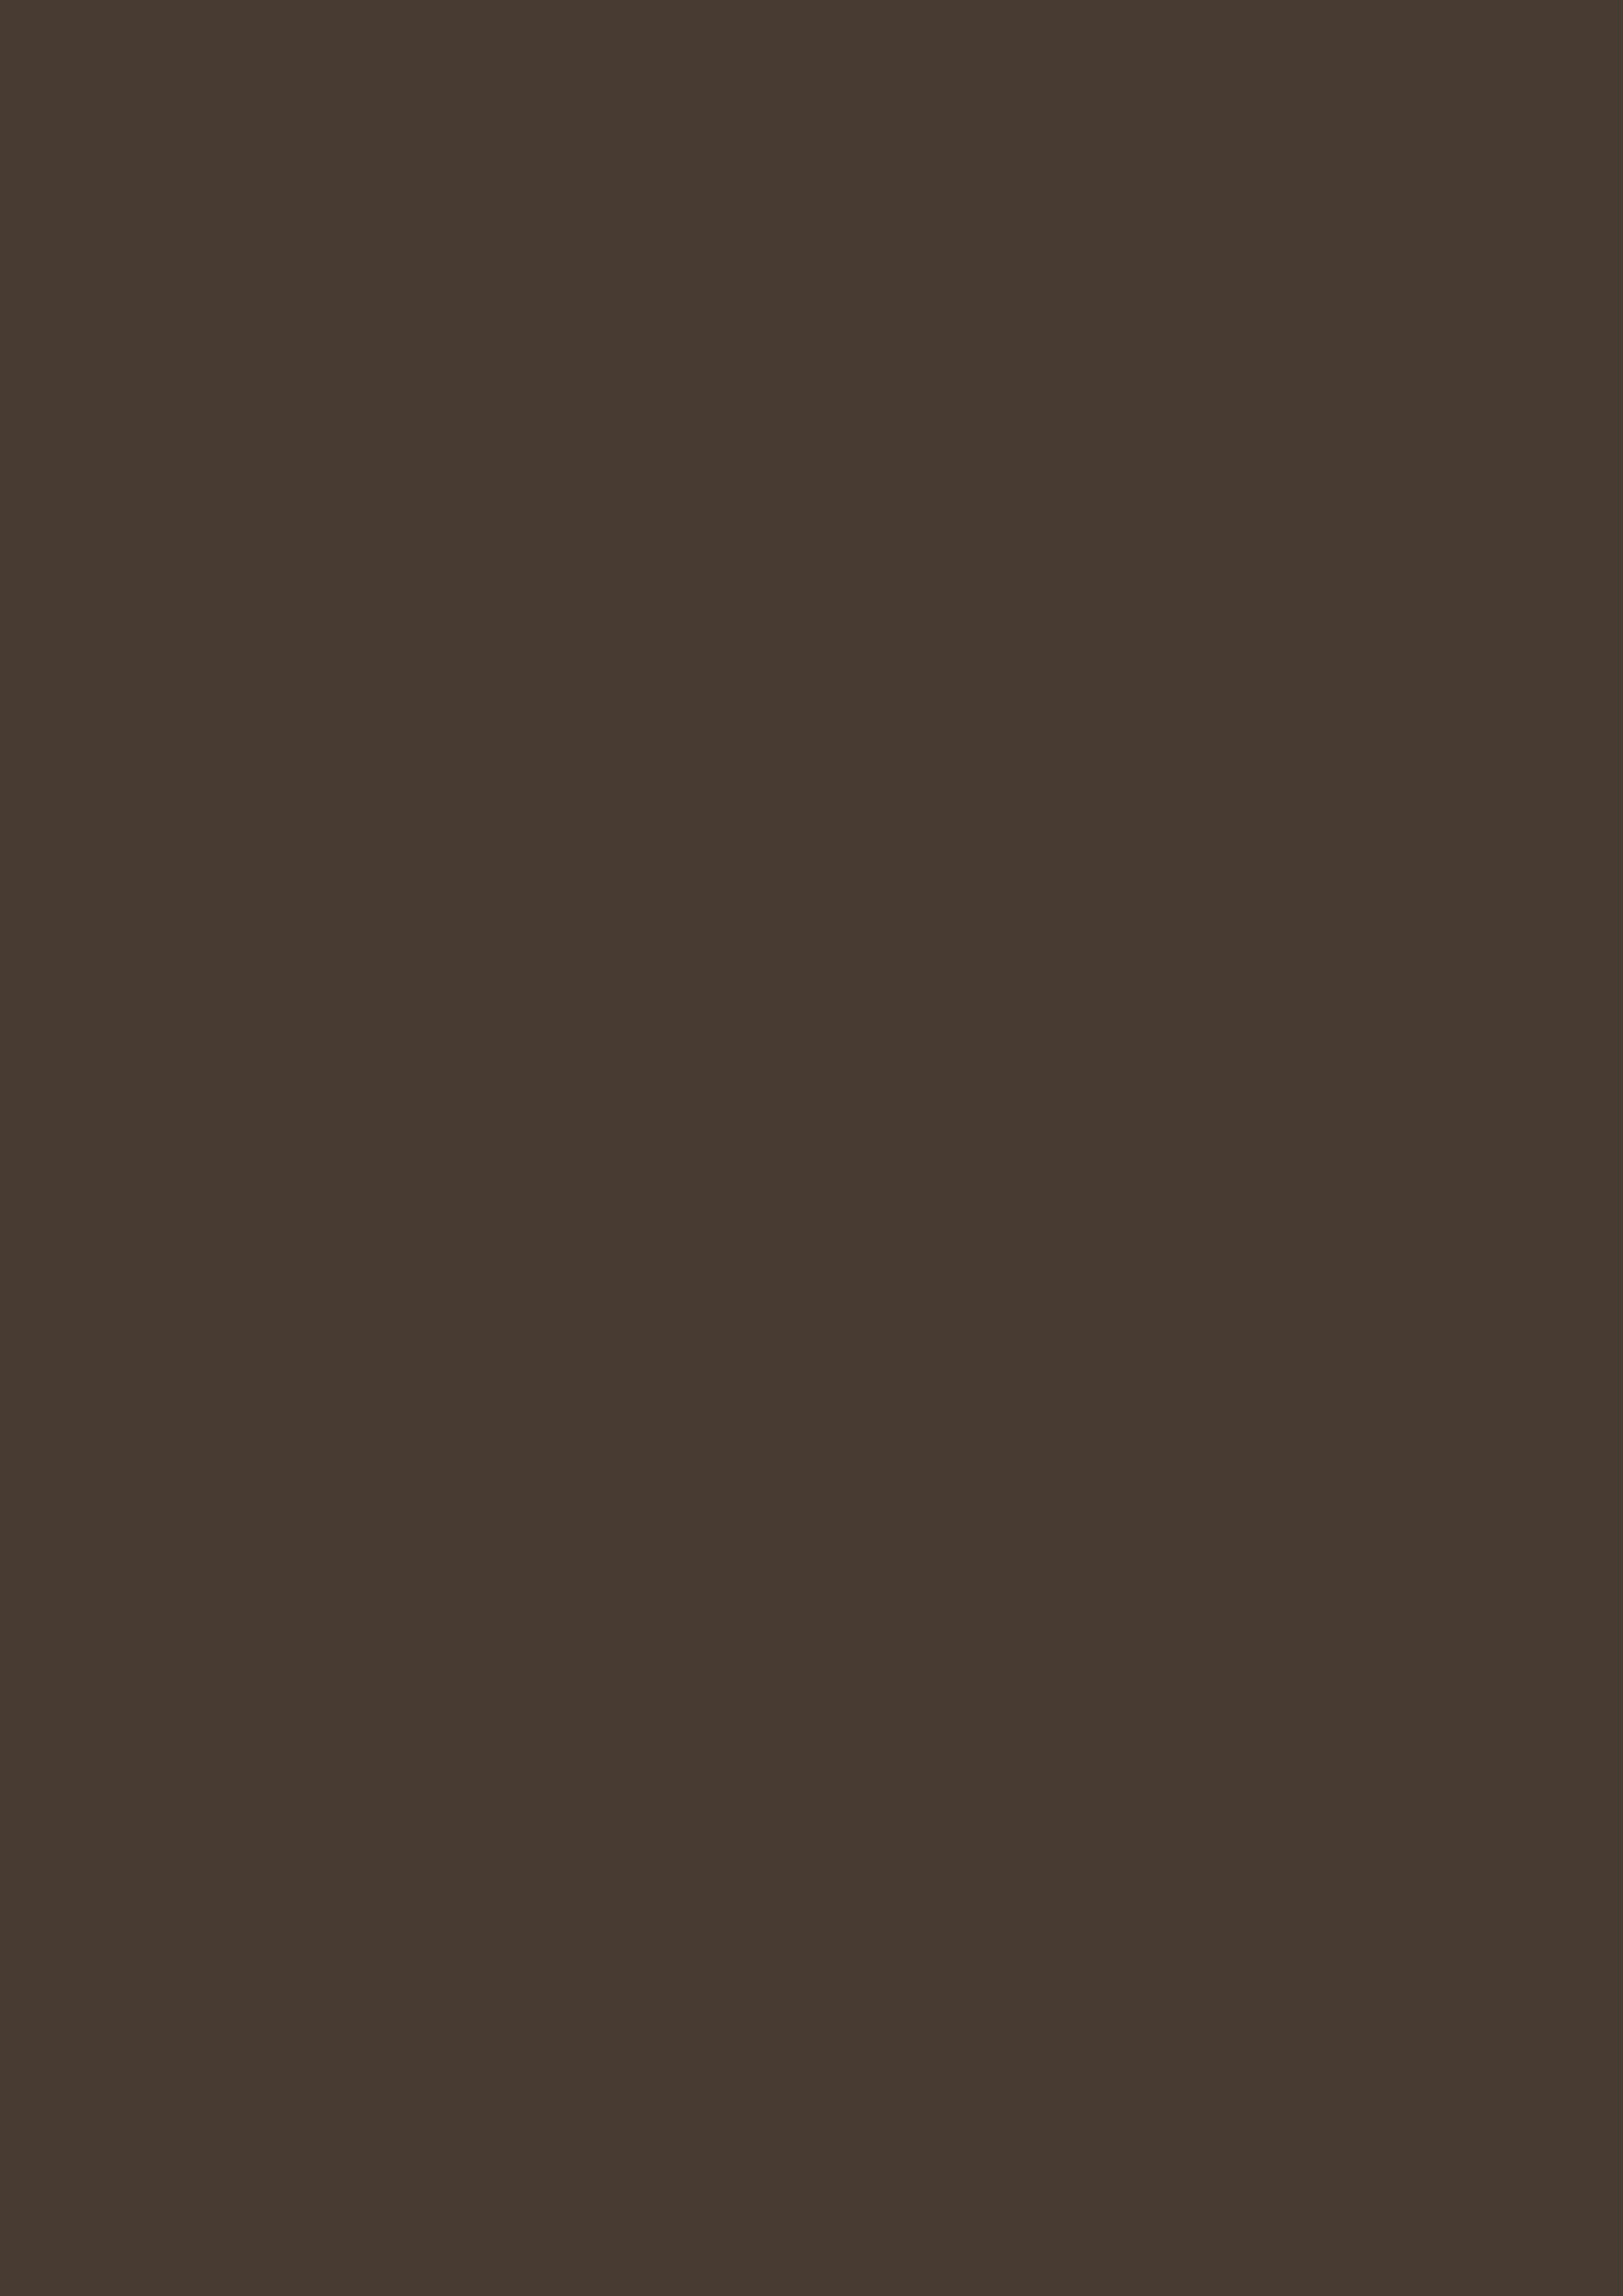 2480x3508 Taupe Solid Color Background